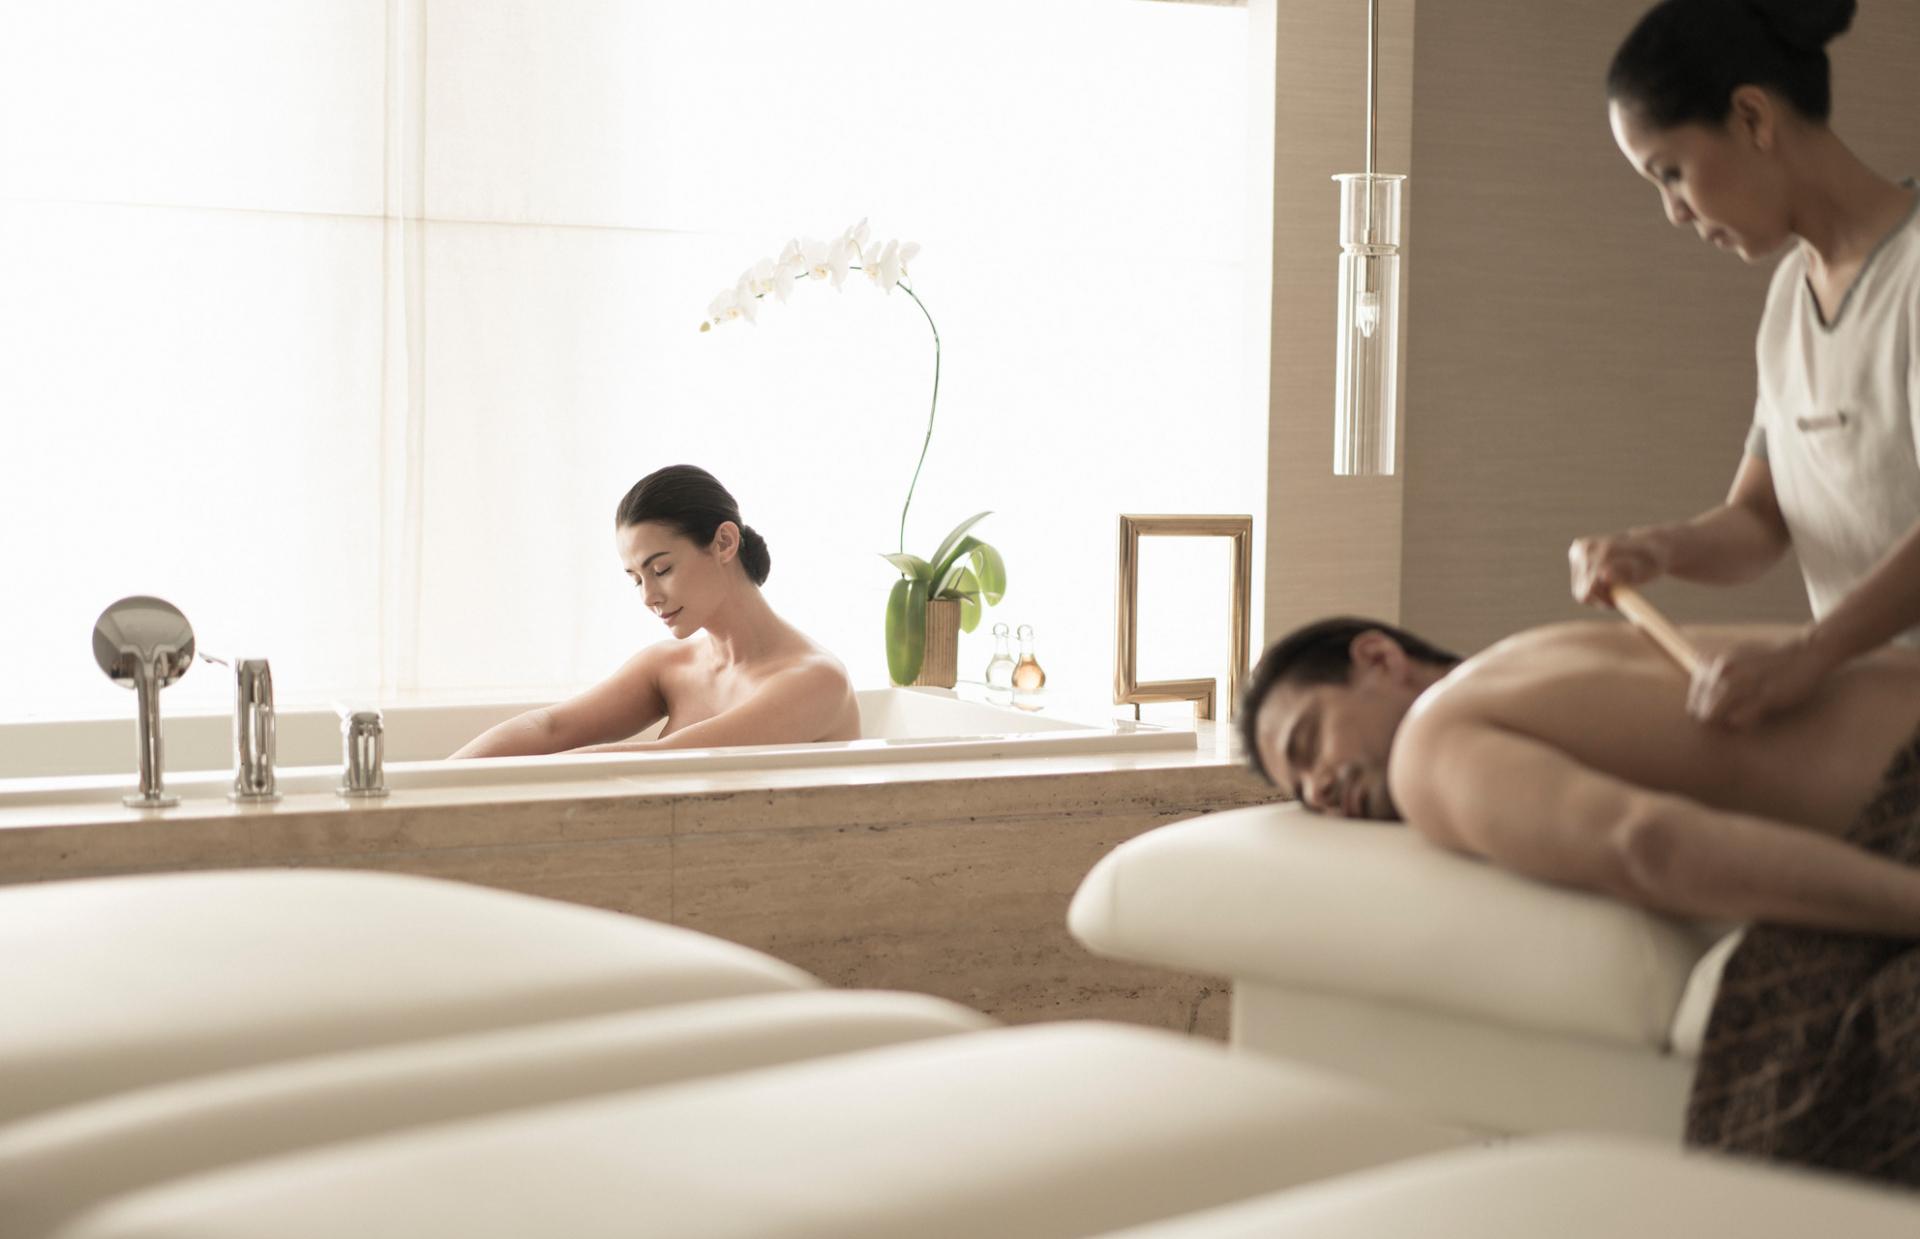 Treat yourself to some much-needed R&R at Four Seasons Hotel Hong Kong